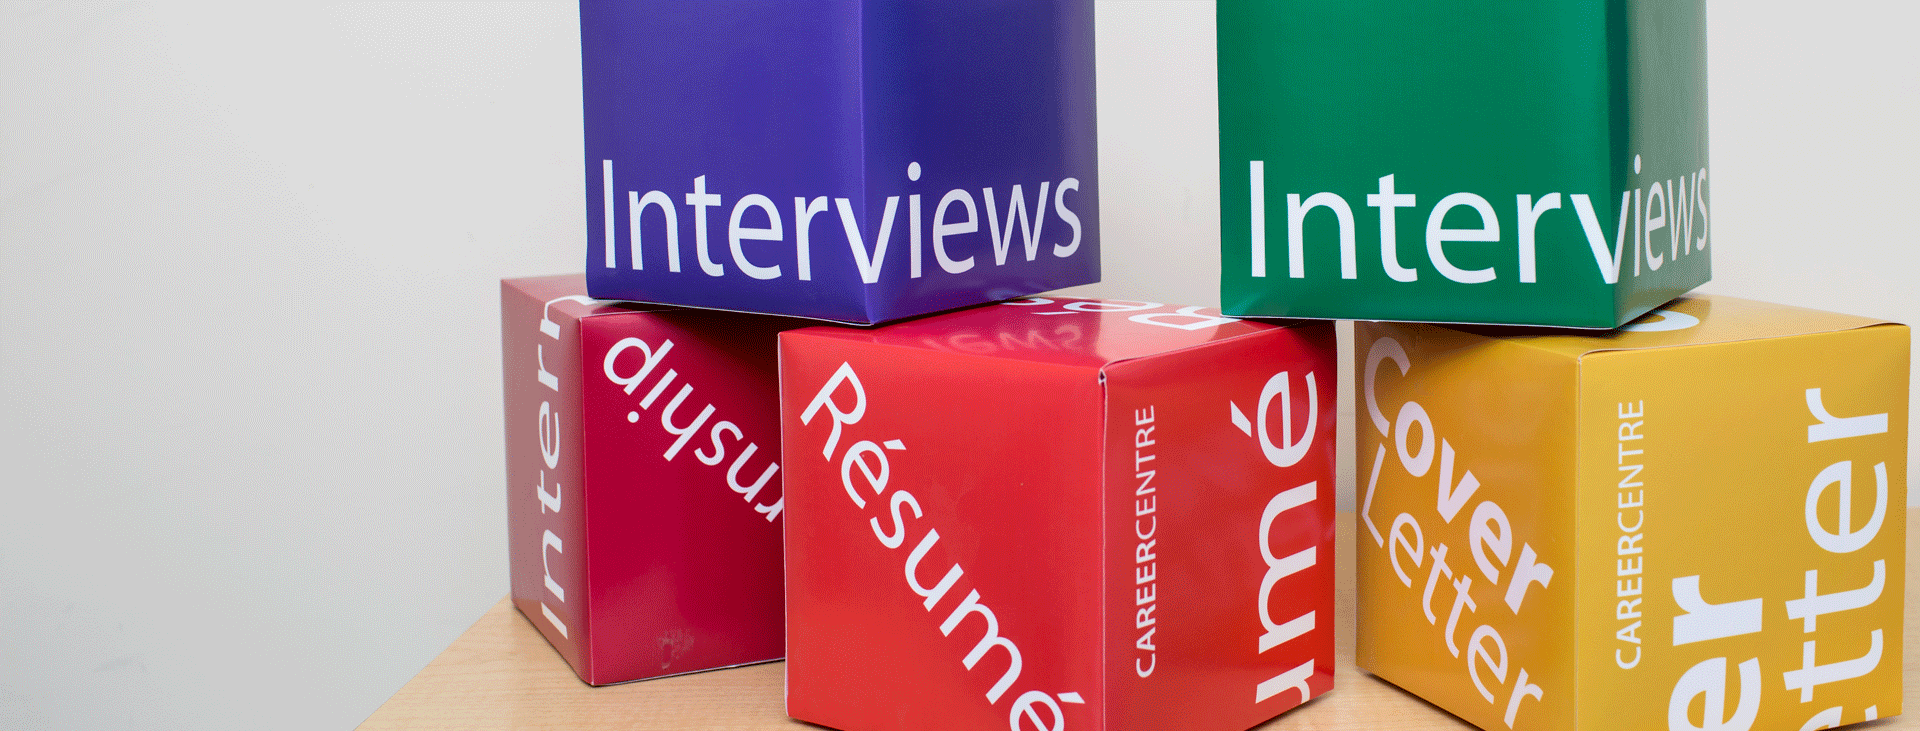 Colorful cardboard cubes with text: interviews, resumes, cover letters